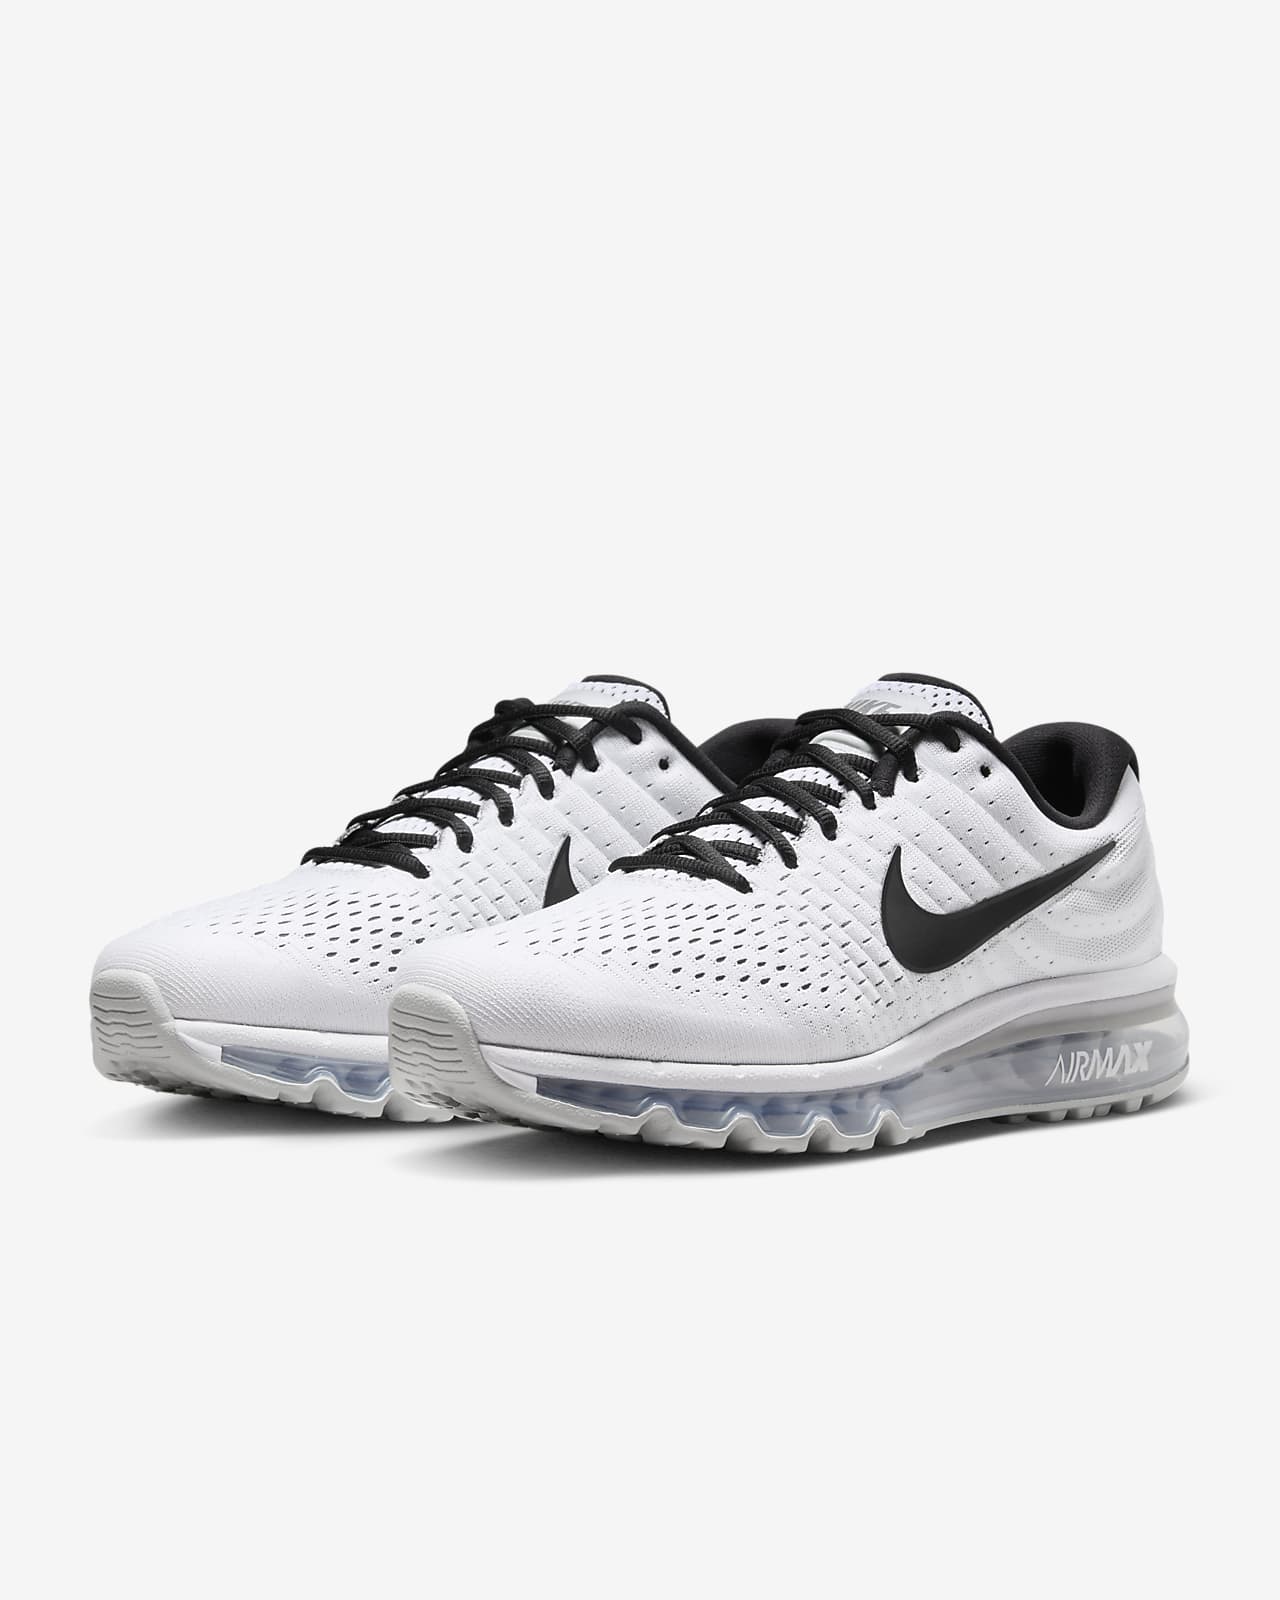 Men's White Trainers & Shoes. Nike UK